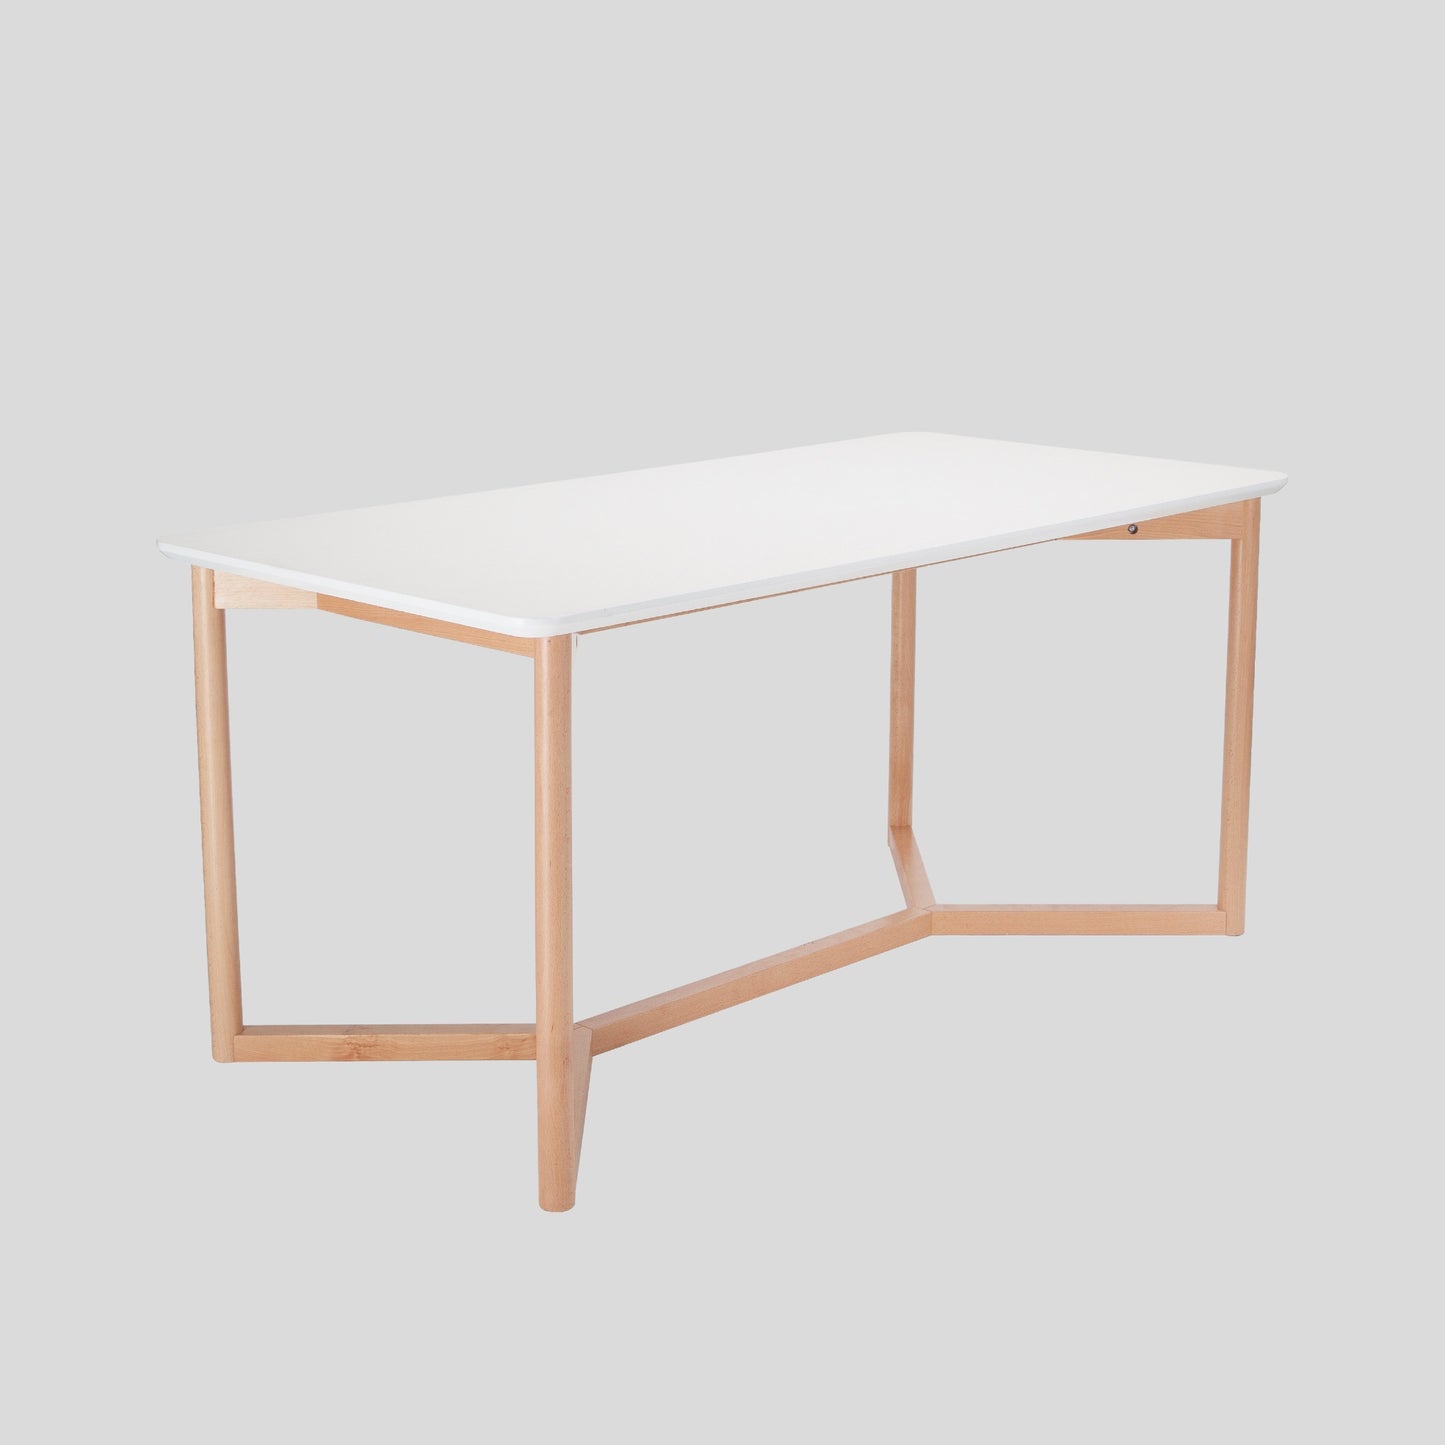 ASGER TABLE